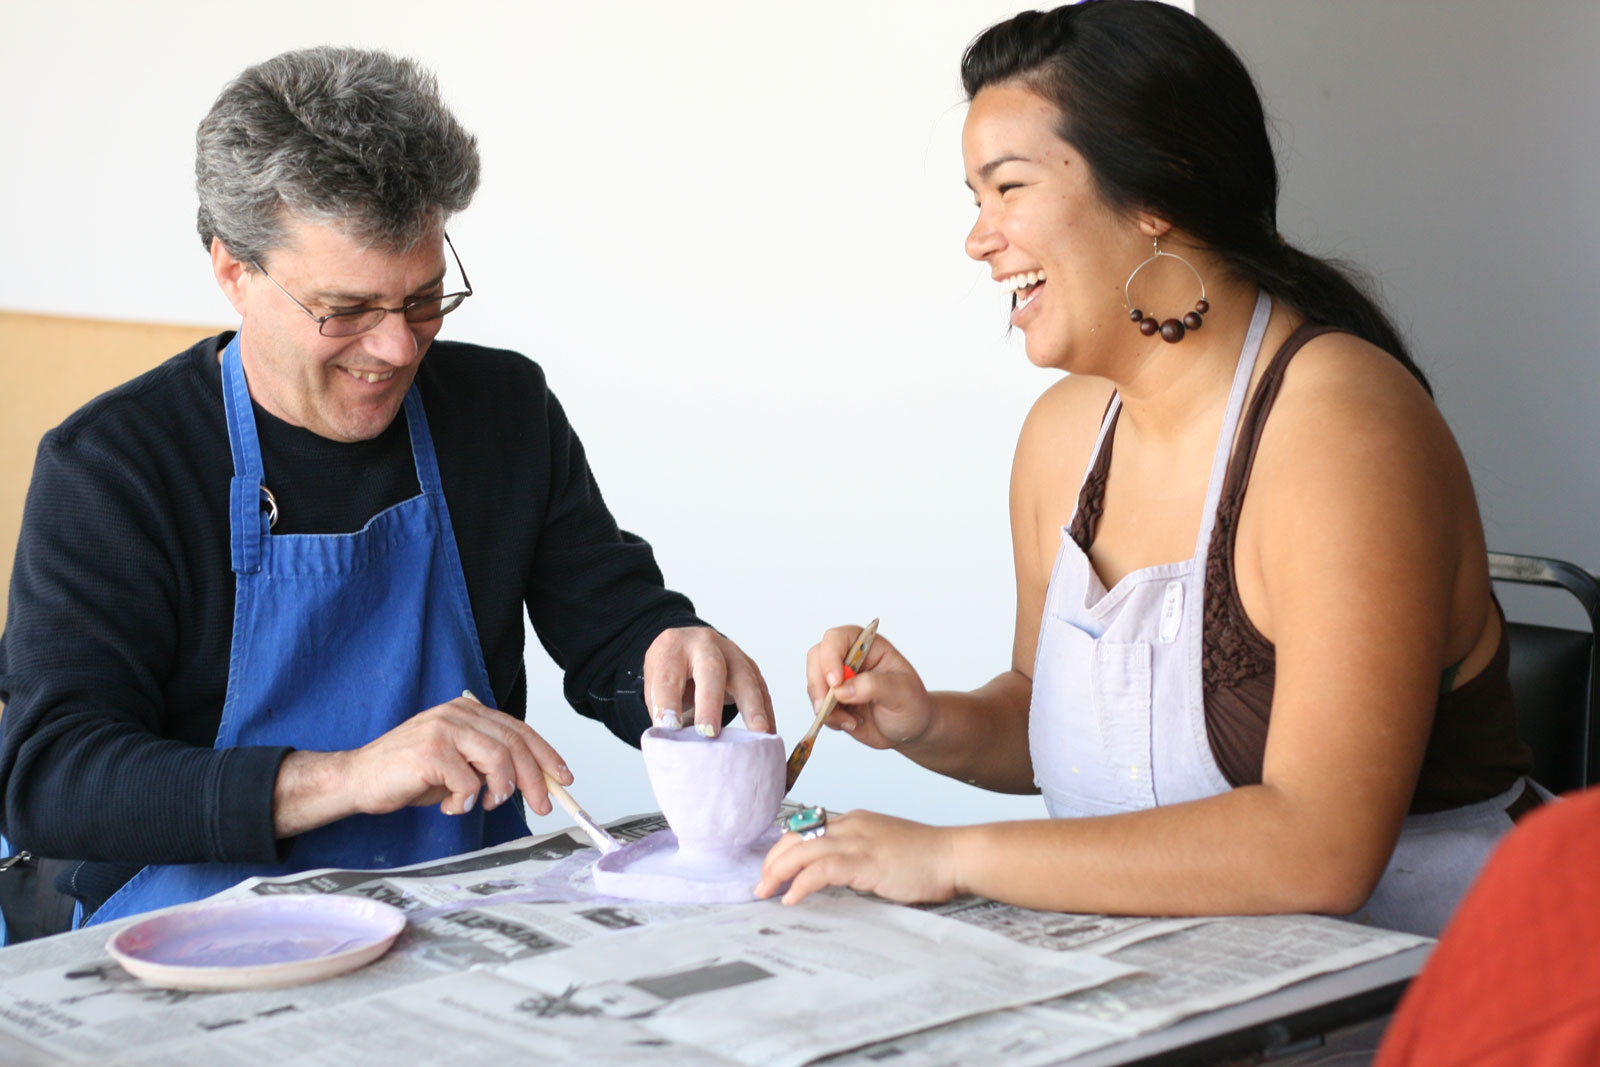 Two LightHouse studios smile as they work on a pottery project